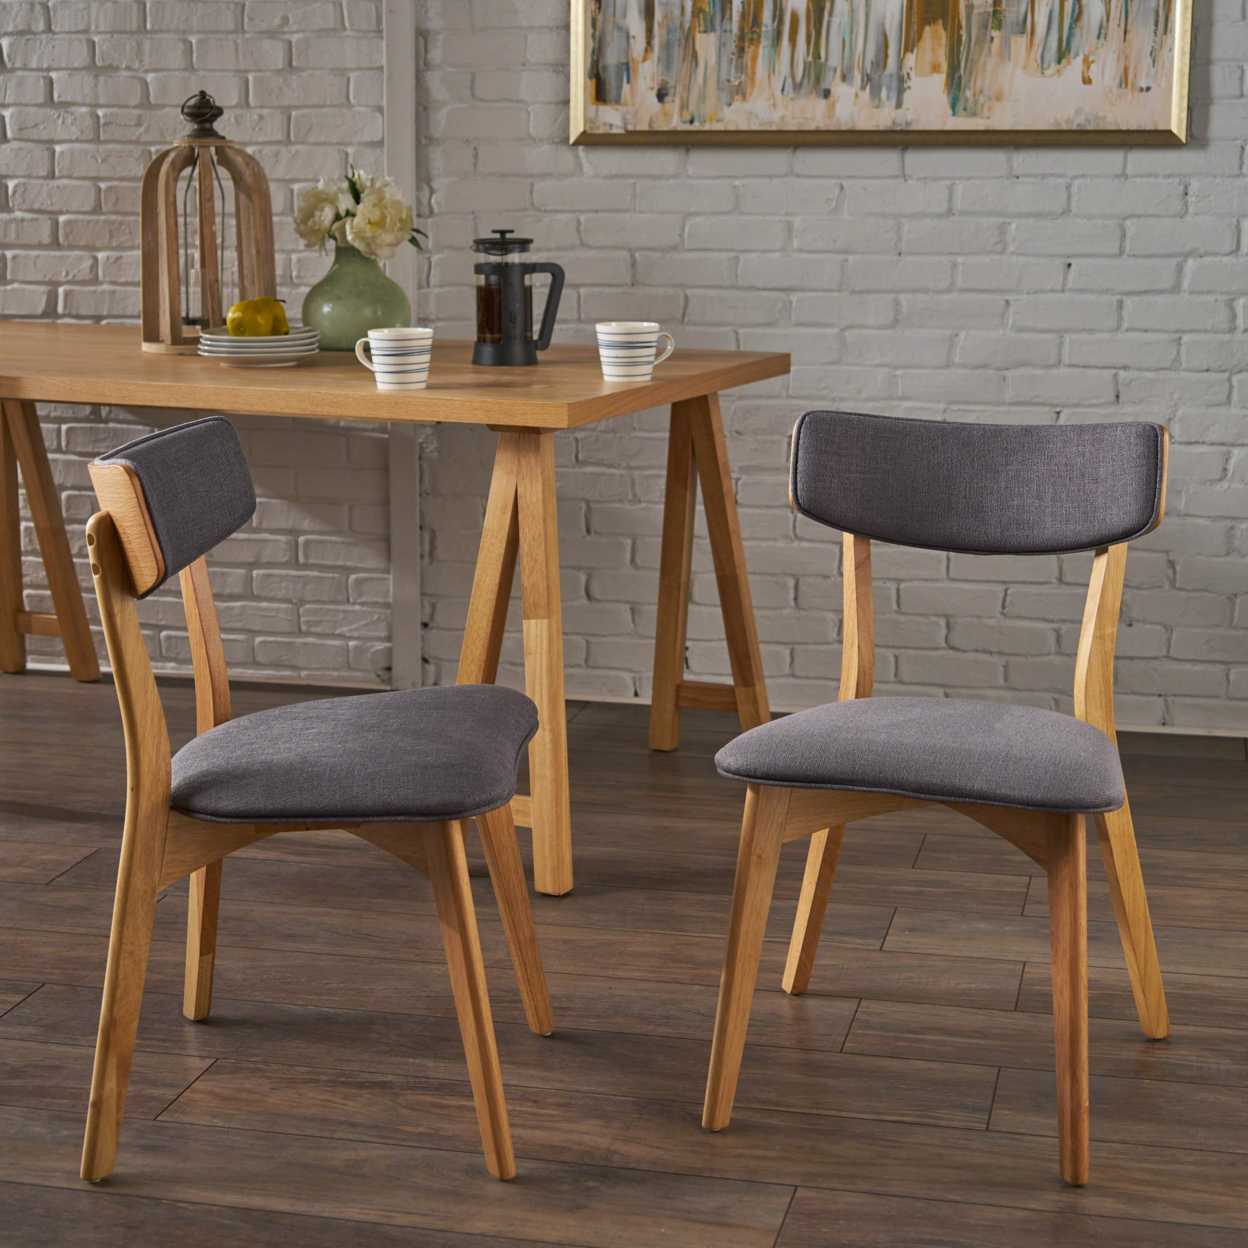 Molly Mid Century Modern Dining Chairs With Rubberwood Frame (Set Of 2) - Light Beige/Natural Oak